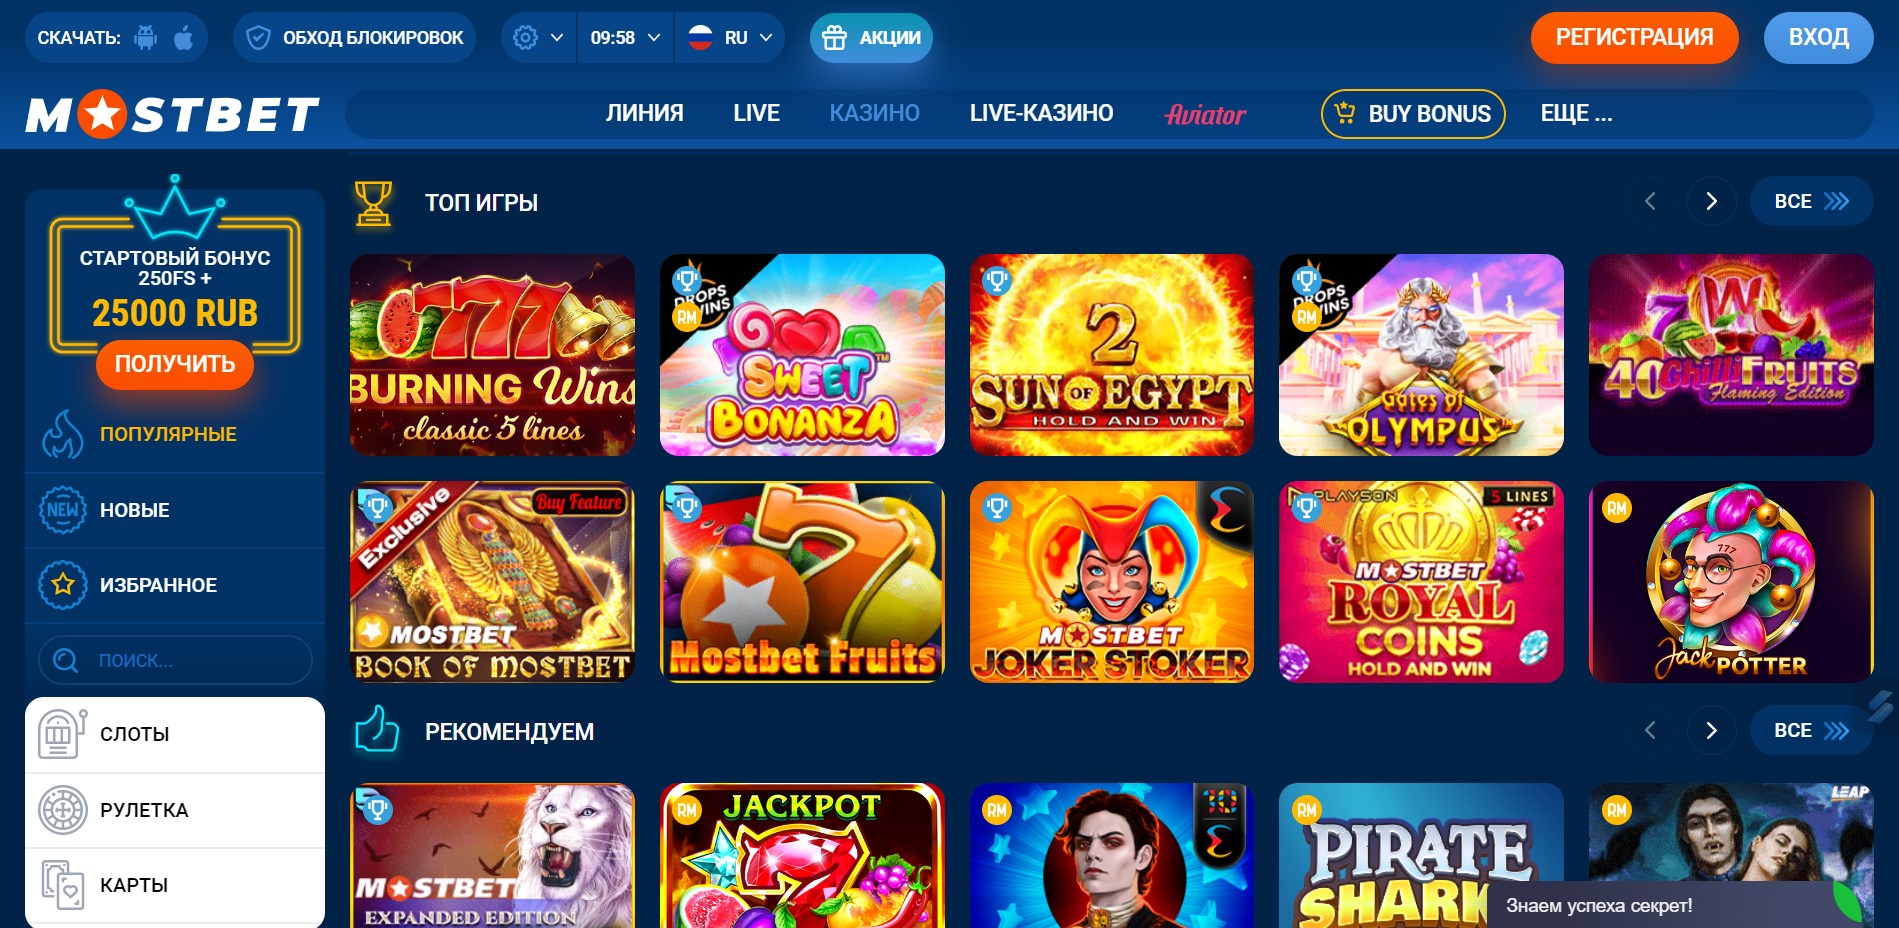 The Definitive Guide To Key Considerations for Choosing an Online Casino in India